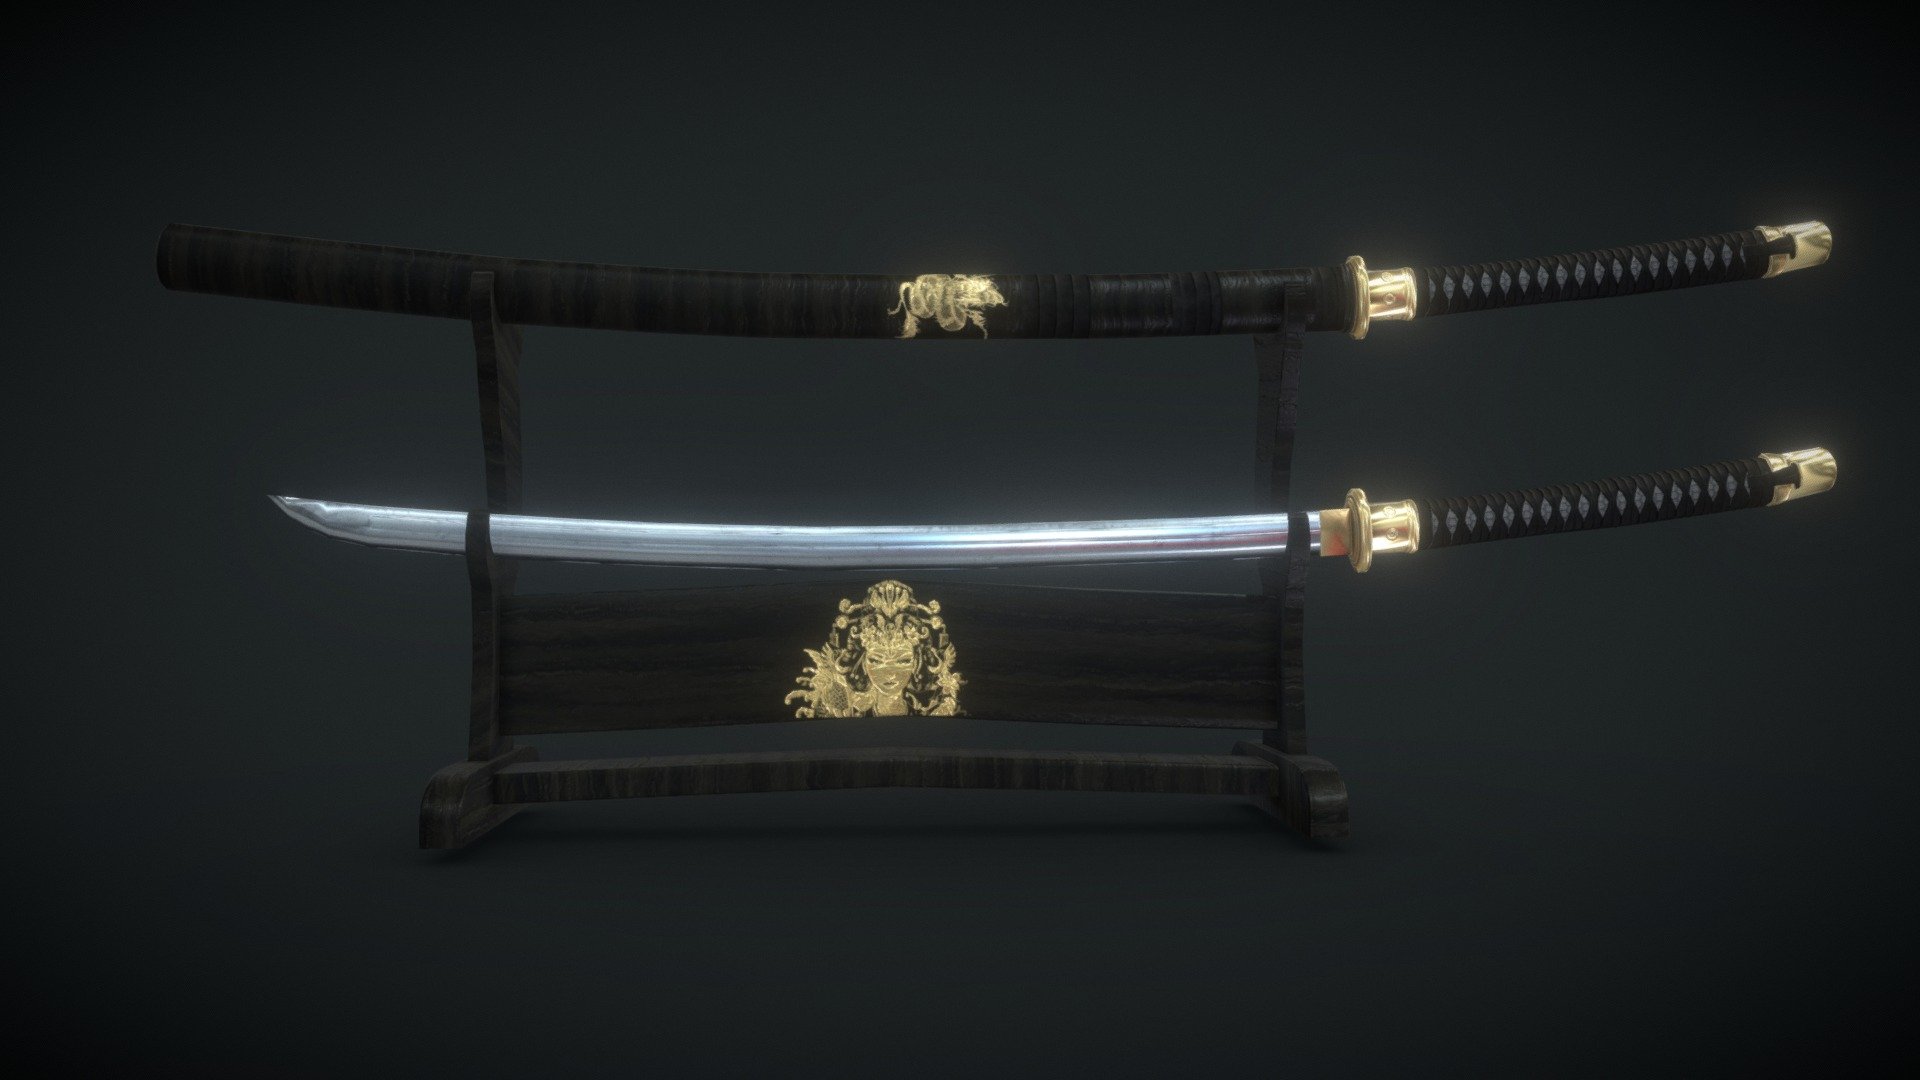 Lowpoly game-ready models.
Both katanas are equal and copied just for better scene view.
Models:Maya
Textures and map baking:Substance painter

Textures are in .png format and contains BaseColor, Metallic, Normal, Roughness.
Textures resolution:2K - Katana, saya and stand low poly model - Download Free 3D model by Sleepwalking (@sevenhells) 3d model